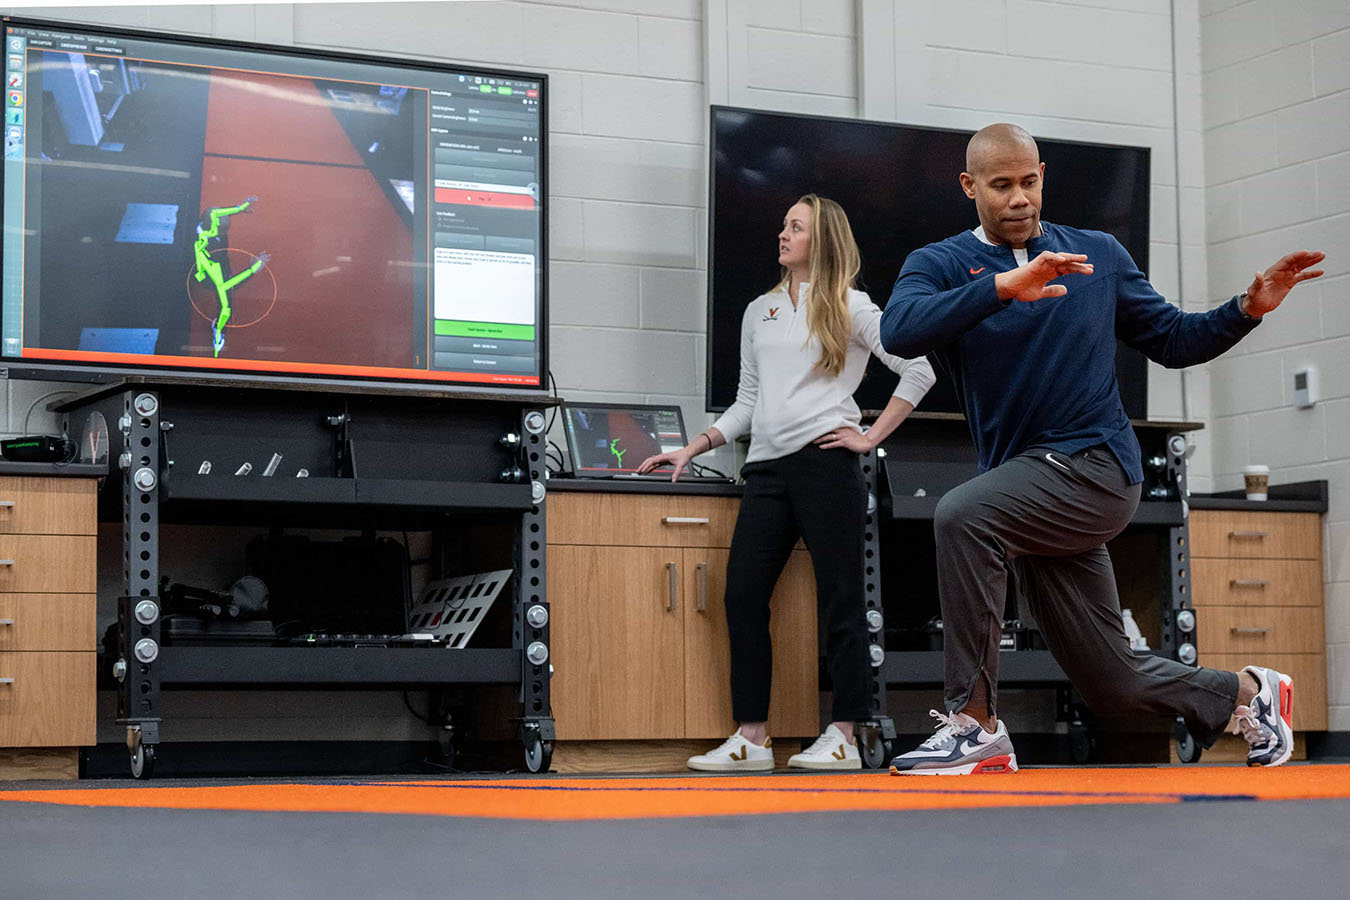 Mike Curtis showing the digital tracking of the equipment while performing lunges